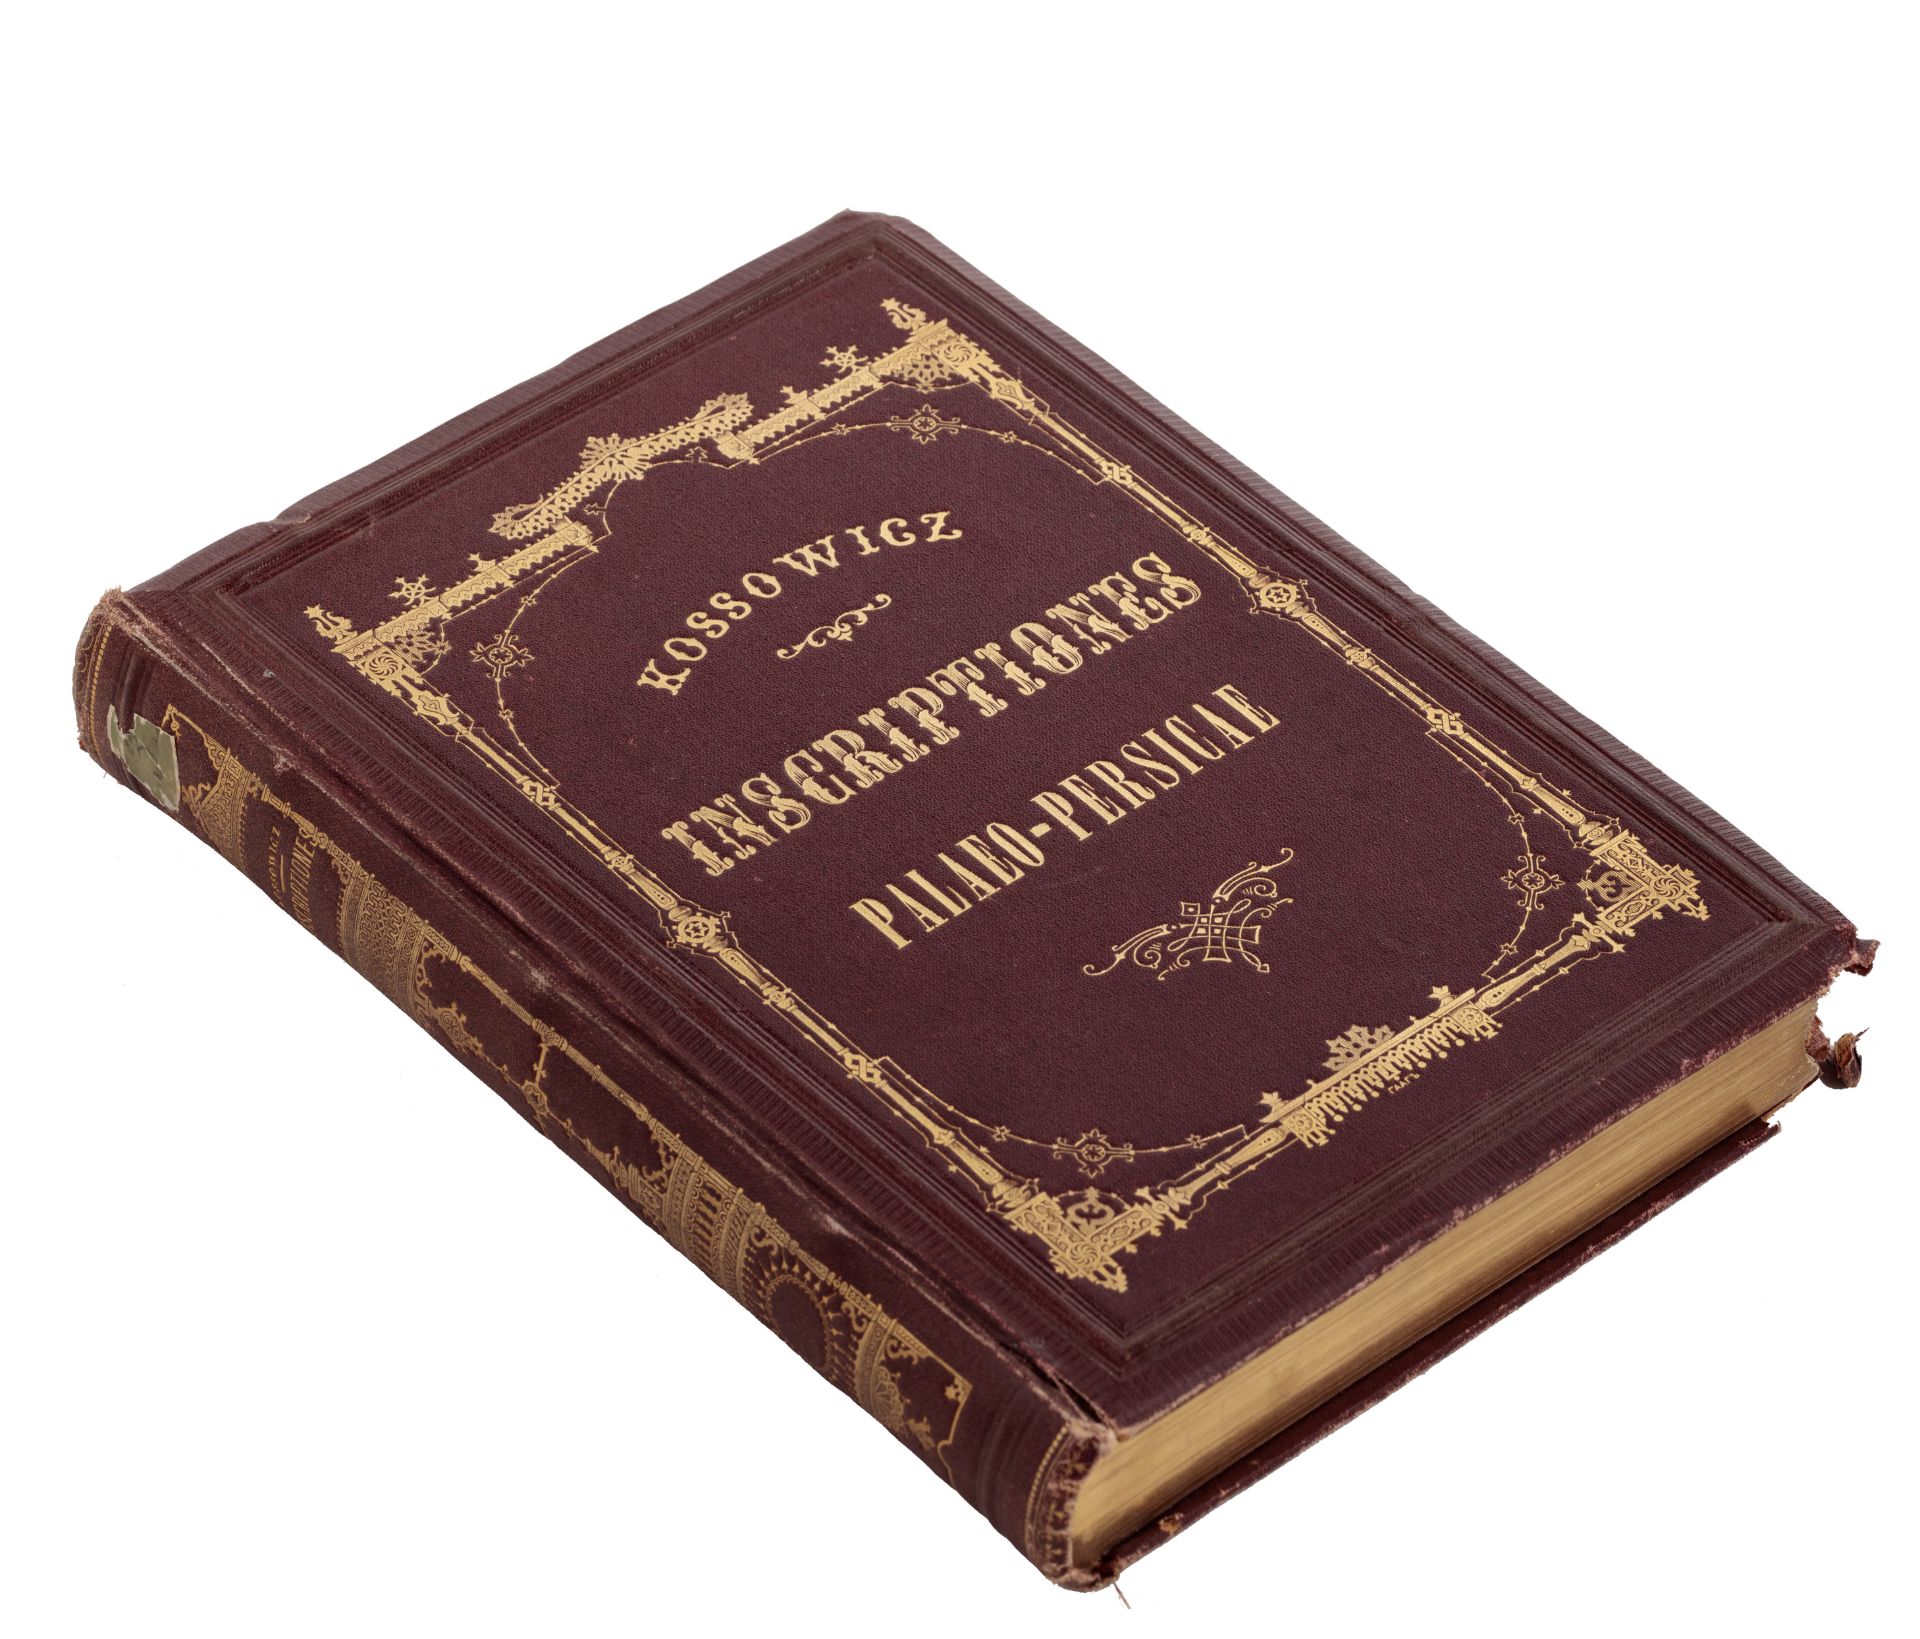 KOSSOVICH KAETAN ANDREEVICH (1814-1883) - An important book of the Grand-duke [...]